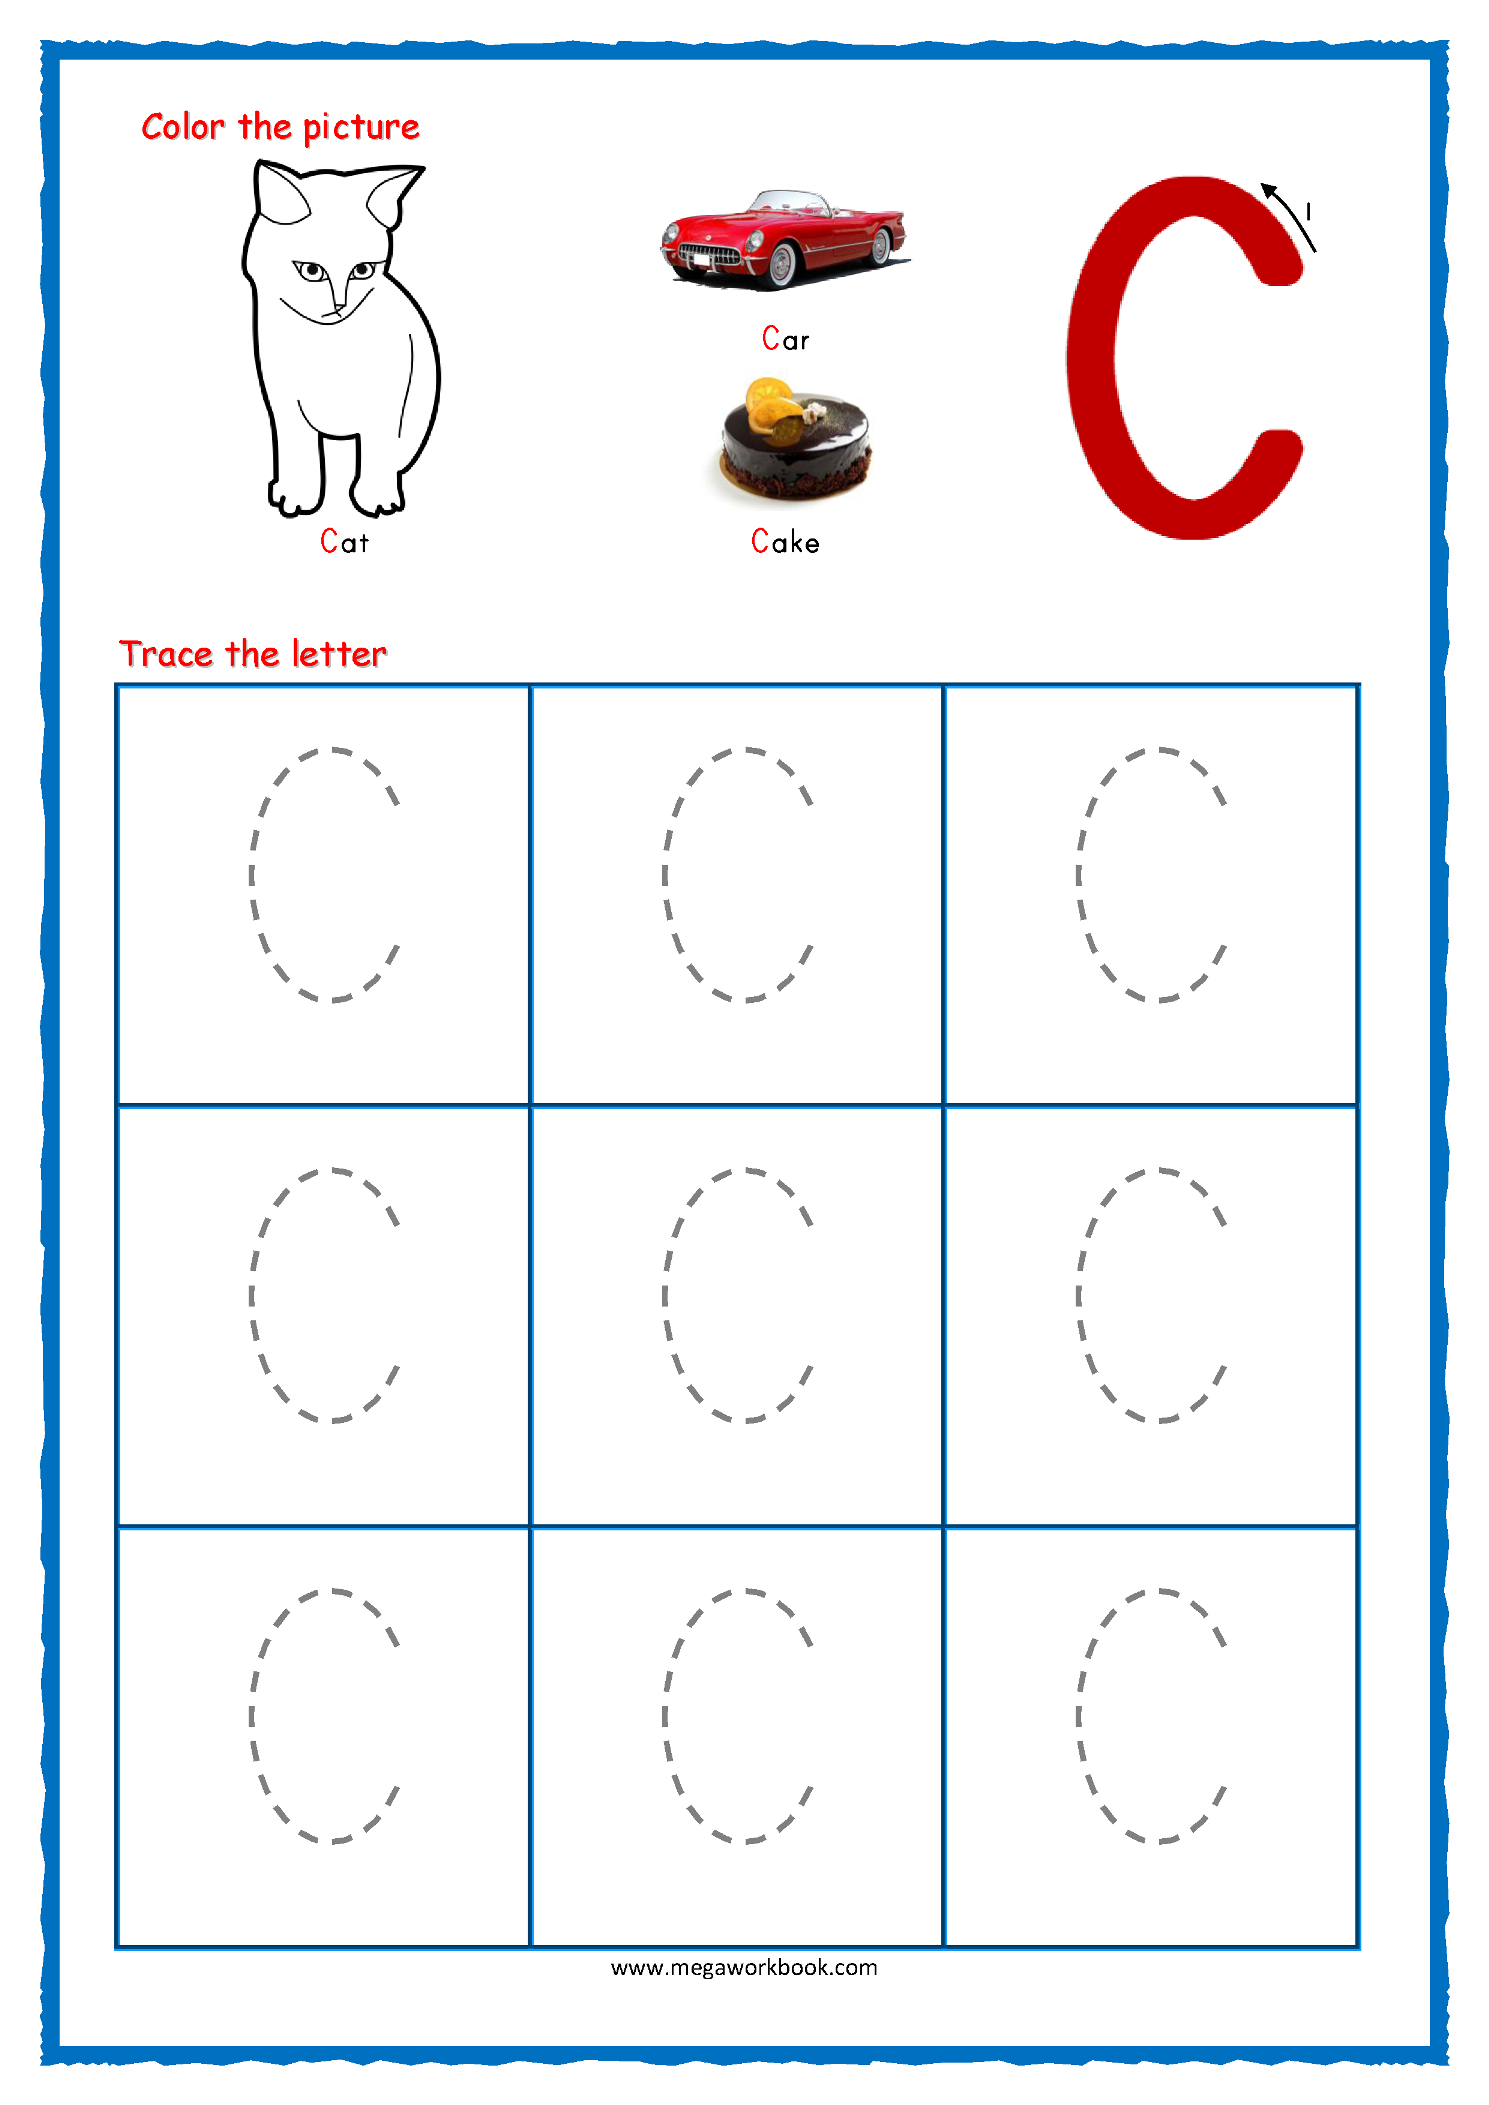 Tracing Letters - Alphabet Tracing - Capital Letters regarding Alphabet A Tracing Sheet